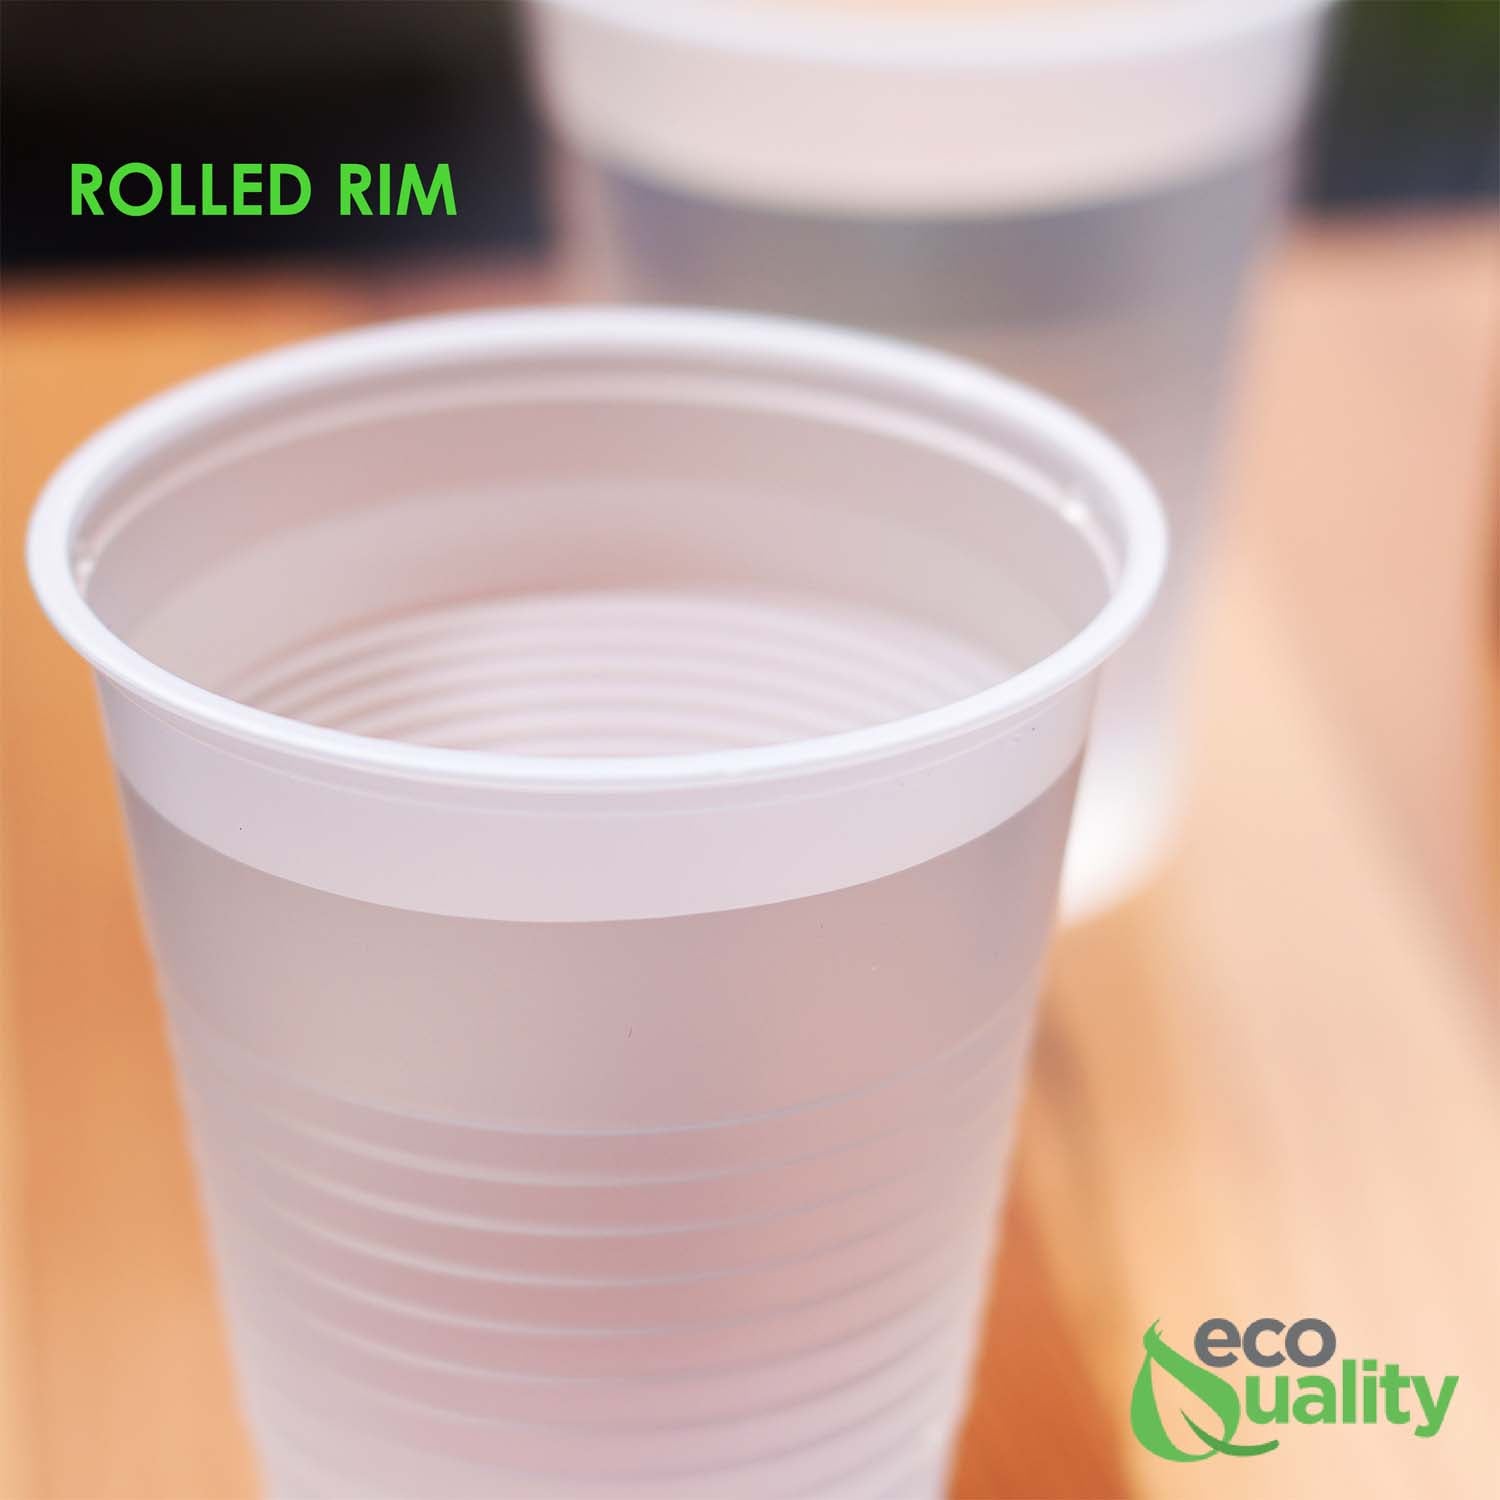 [100] Translucent Plastic Cups - Disposable 7 ounce Cold Drink Party Cups - Cold Drink, Soda Cups, Party Cups, Water Cups, Drinking Cups for Home, Office, Events, Parties and Takeout